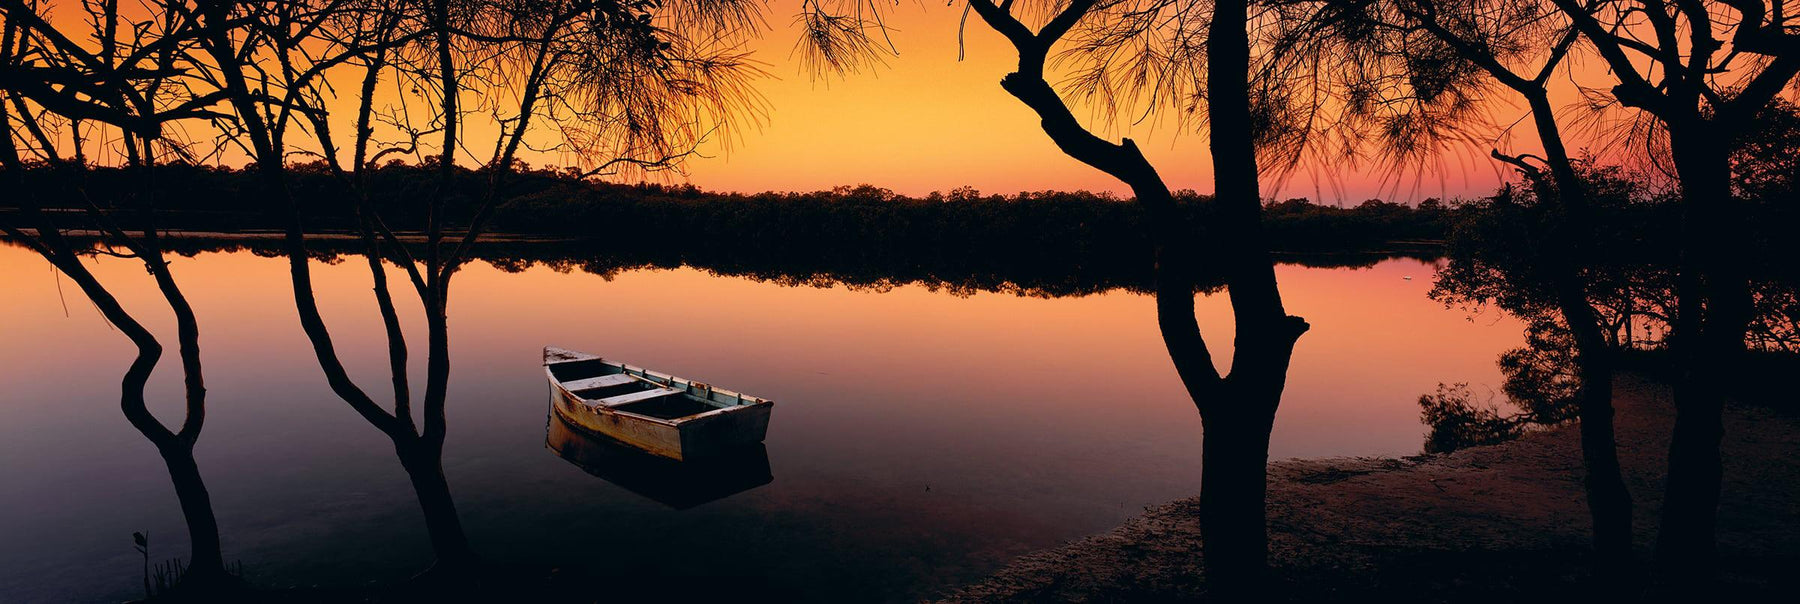 Old wooden row boat in between trees on the bank floating in the Noosa River of Australia at sunrise